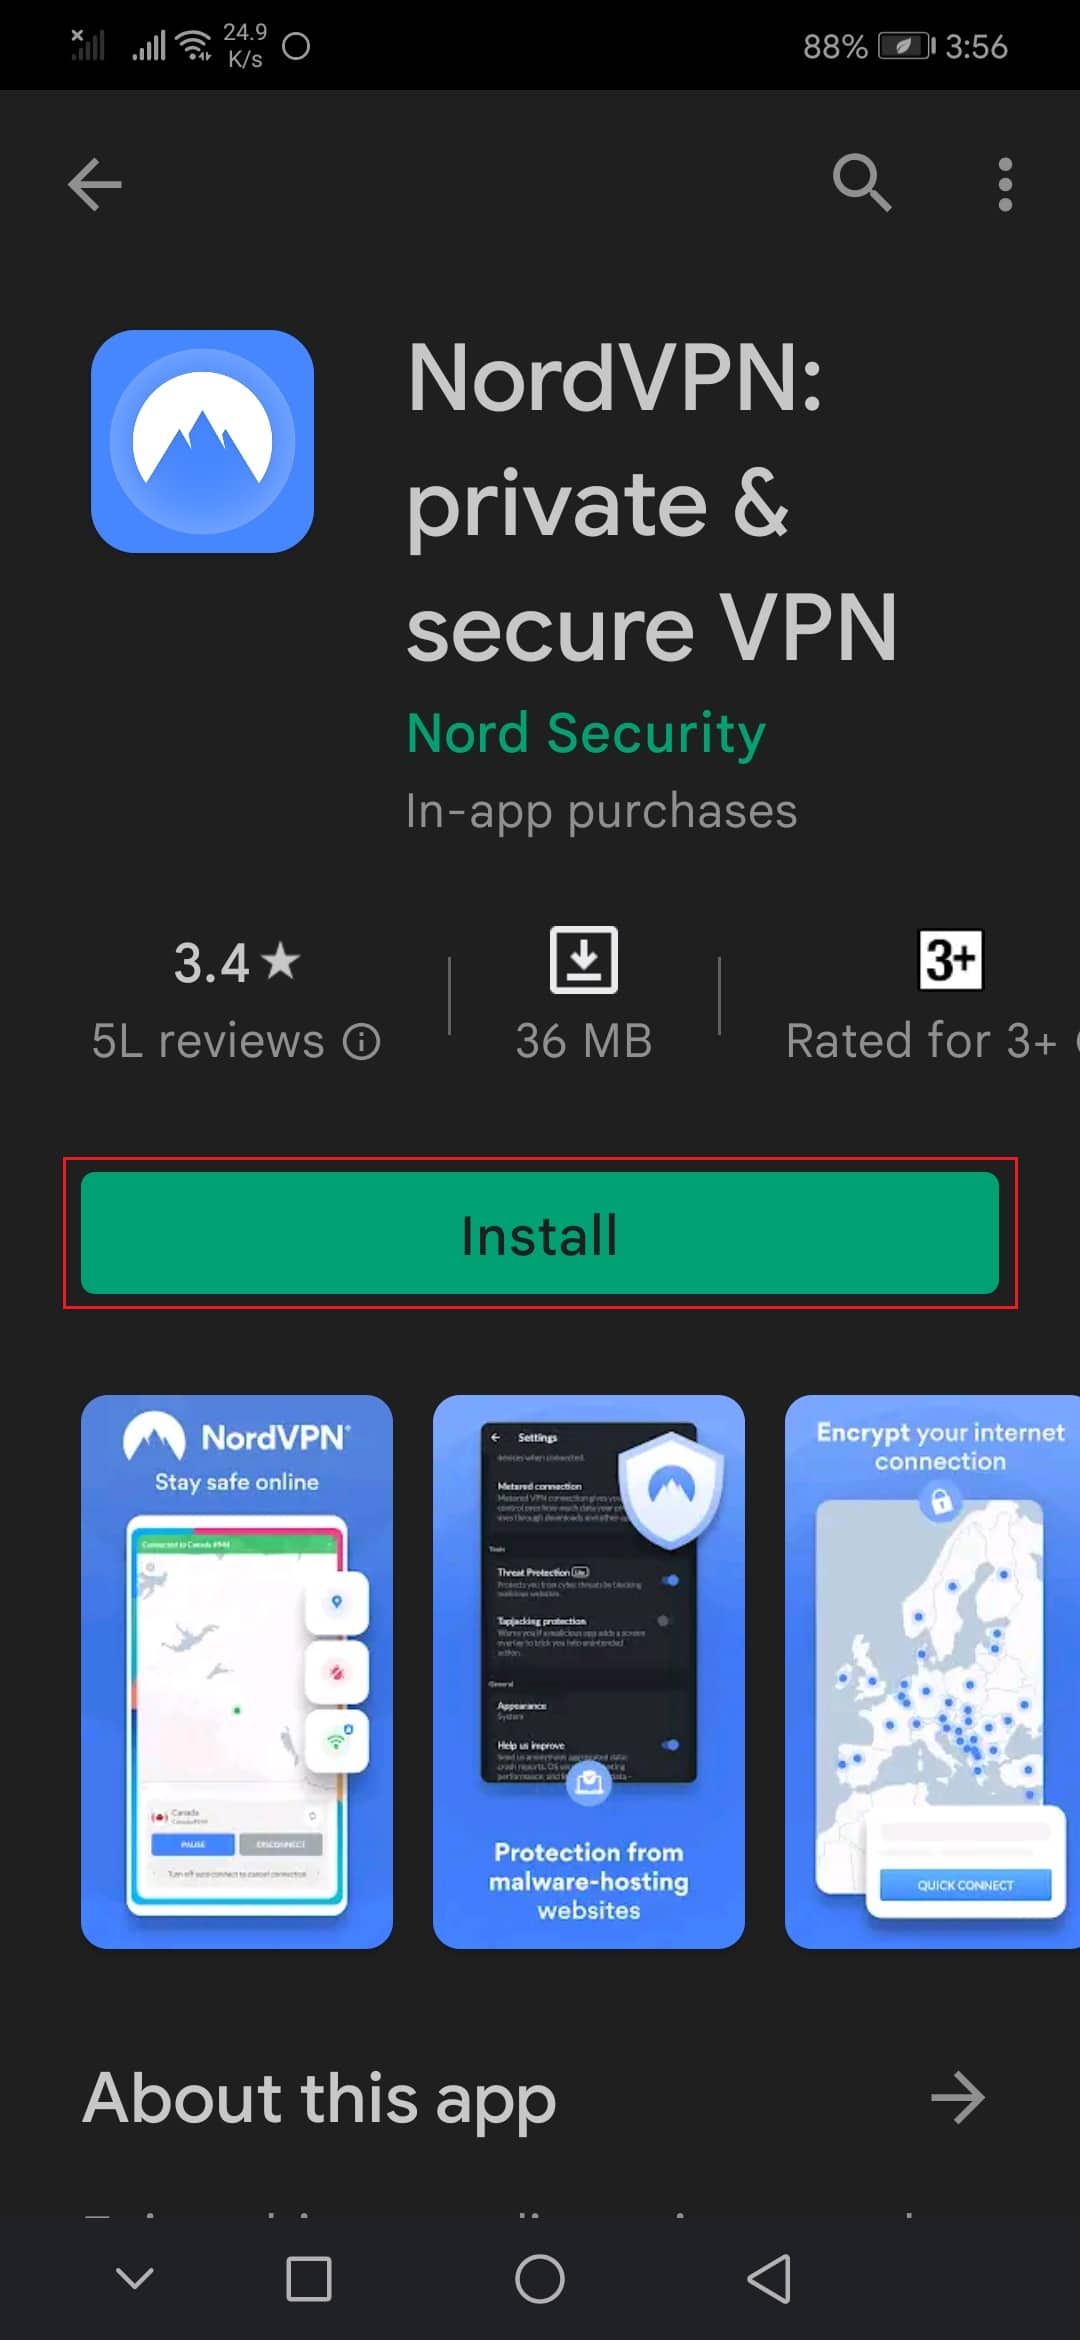 nordVPN android app playstore. Best Free Unlimited VPN for Android